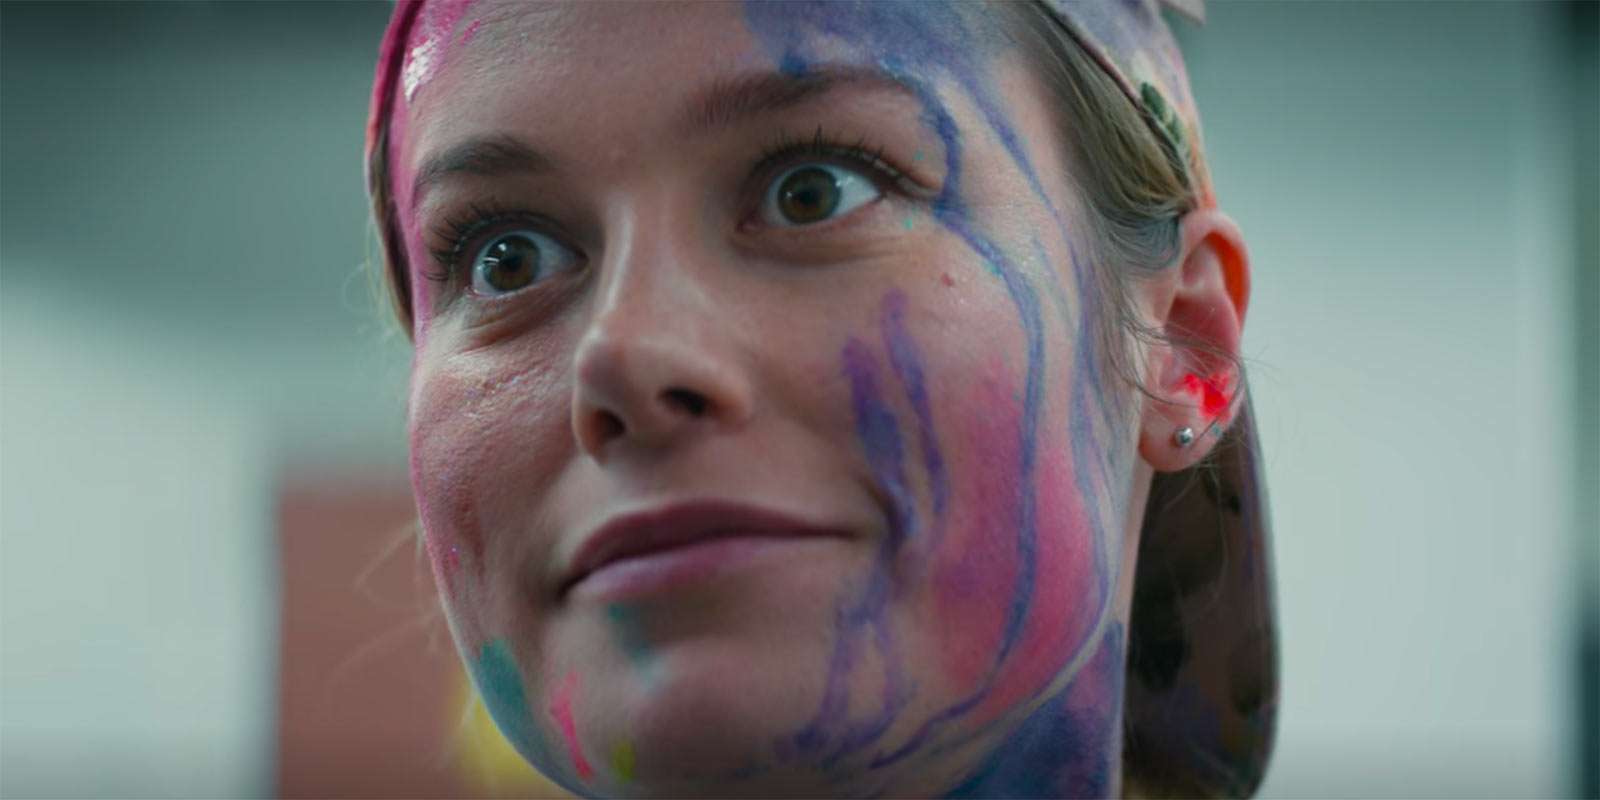 "Unicorn Store" Review: While Charming, Hits Too Close to Home